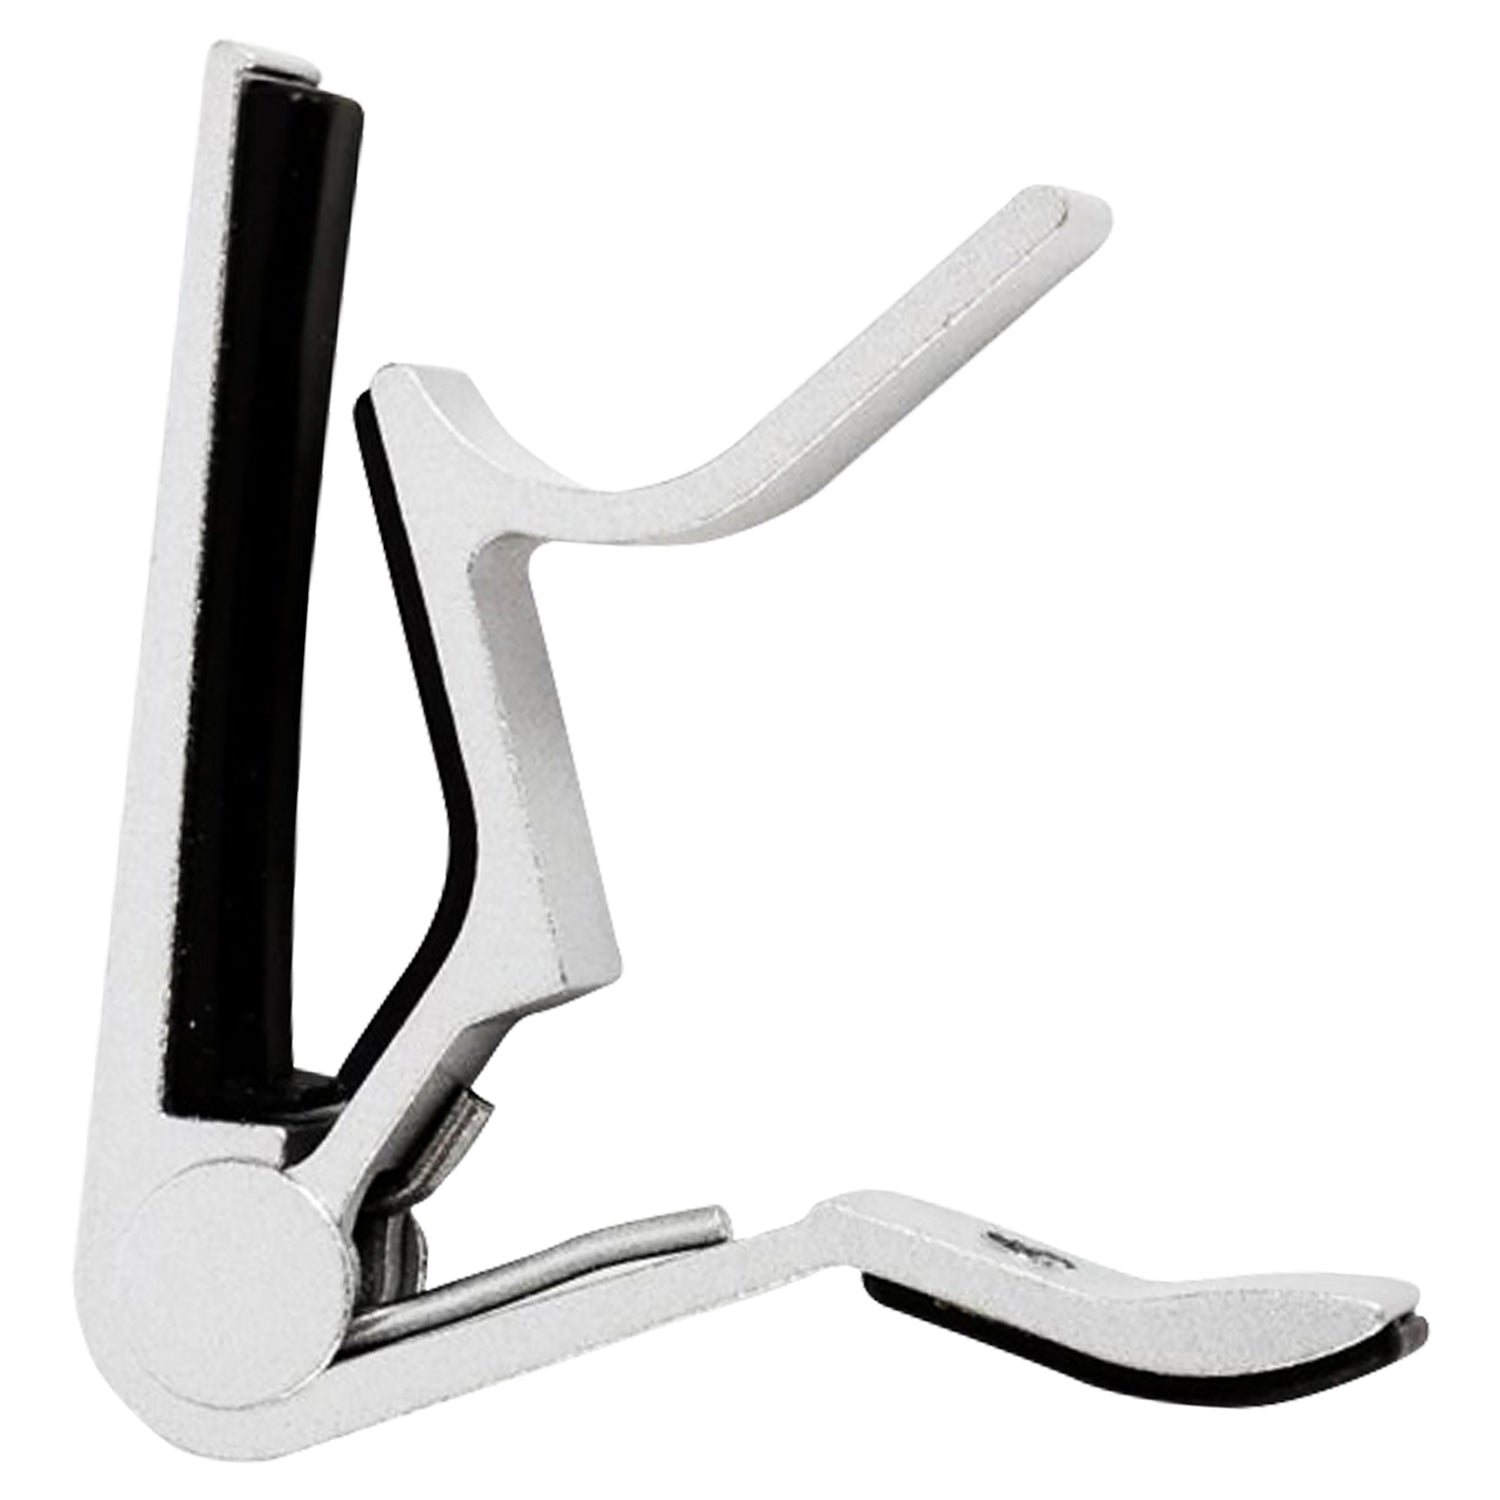 5Core Guitar Capo String Clamp Kapo w Soft Padding for Acoustic & Electric Guitars White